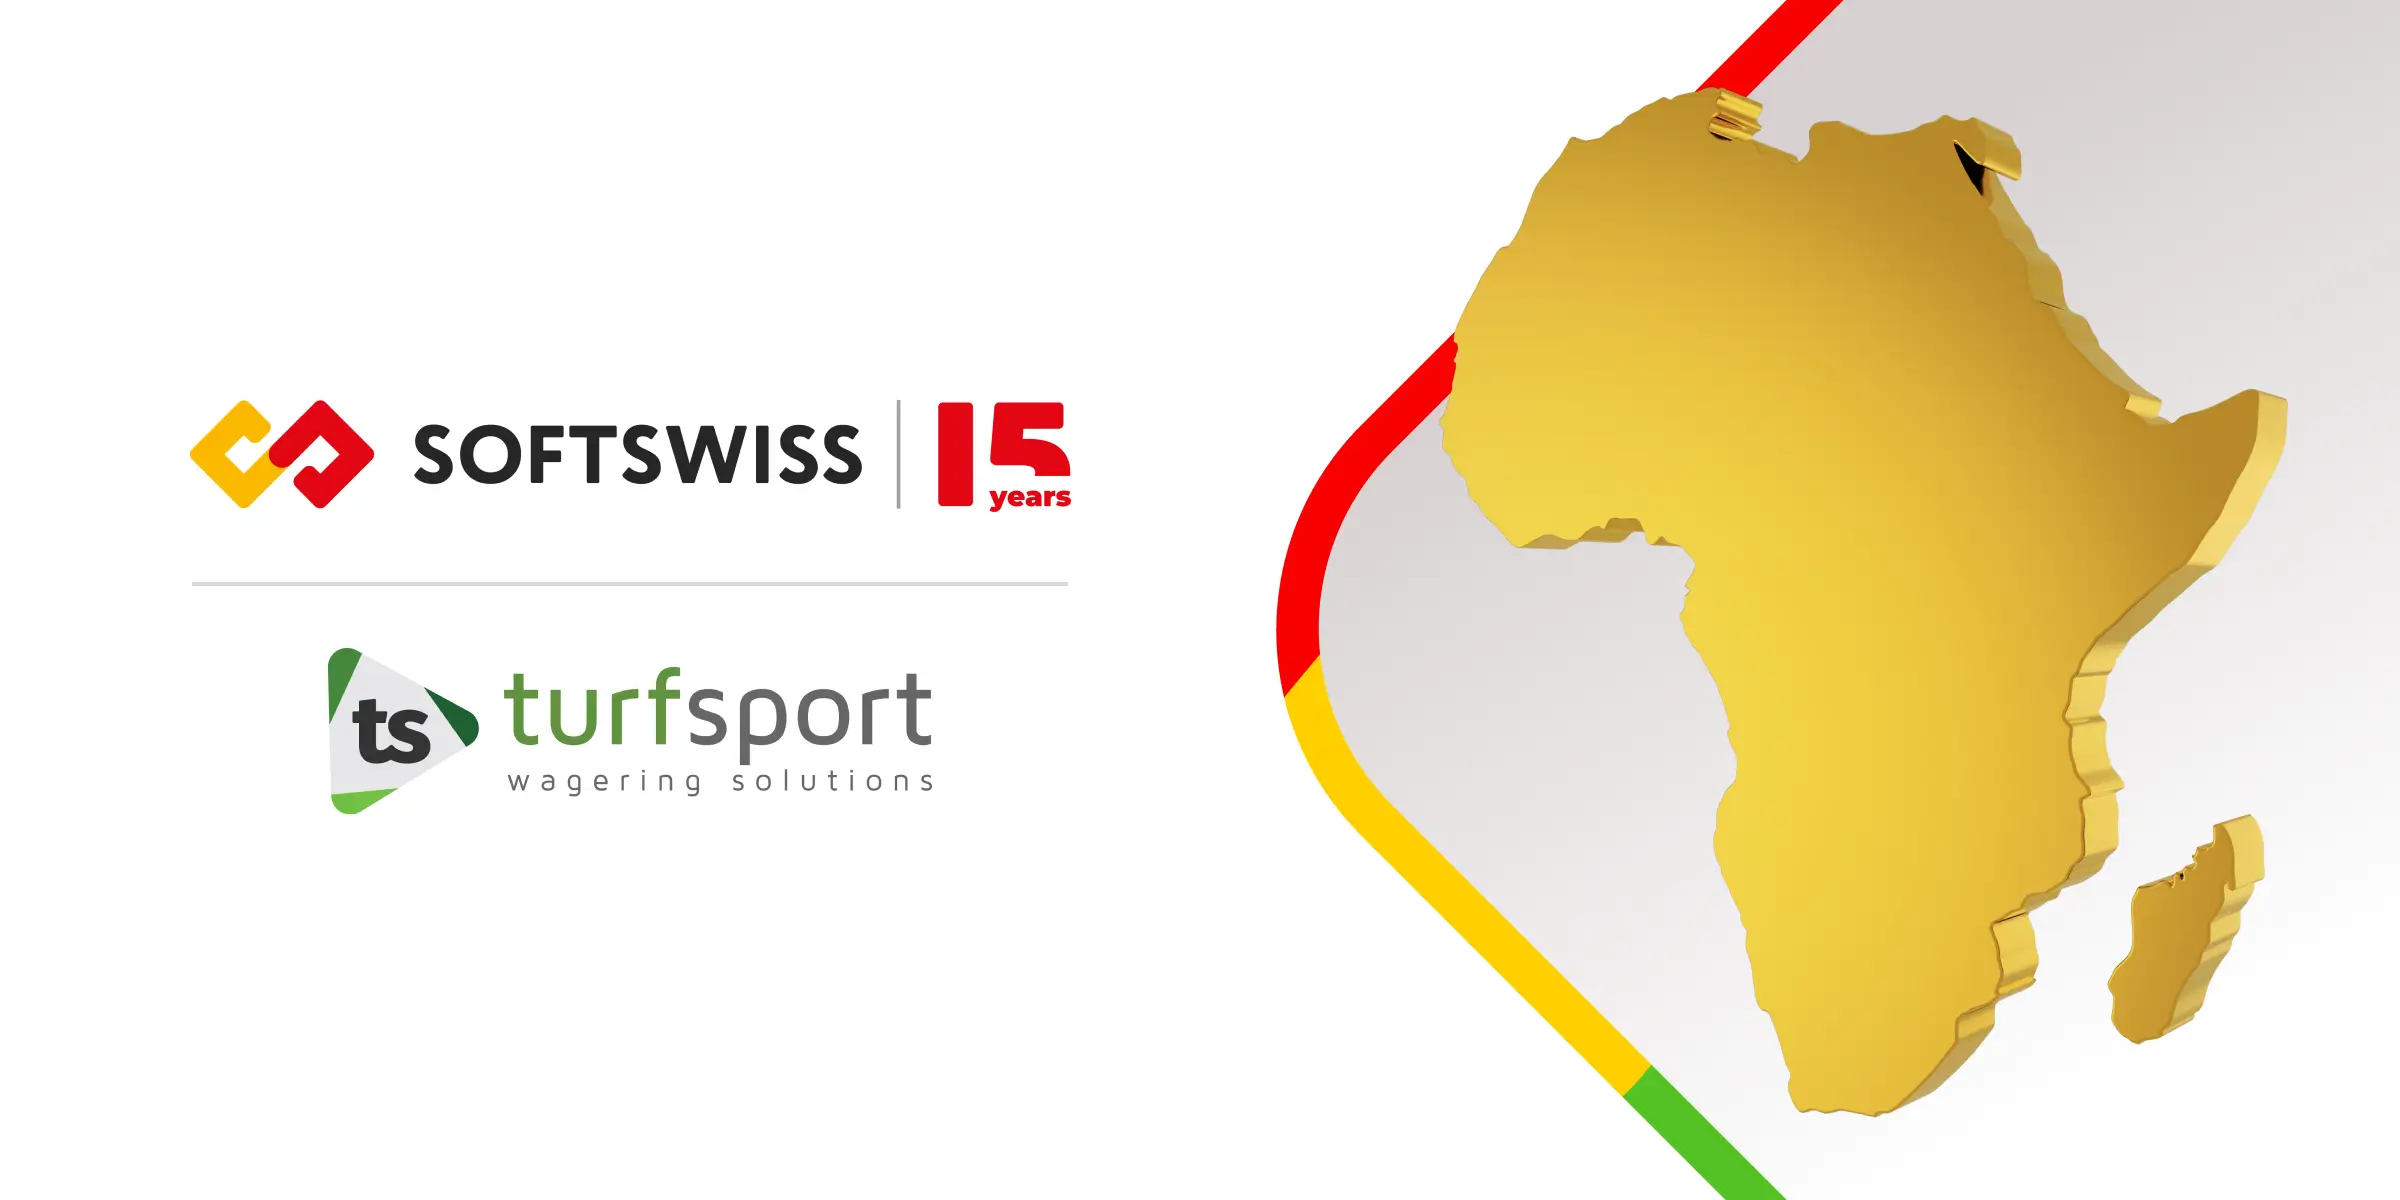 SOFTSWISS Enters African Market Through Turfsport Acquisition